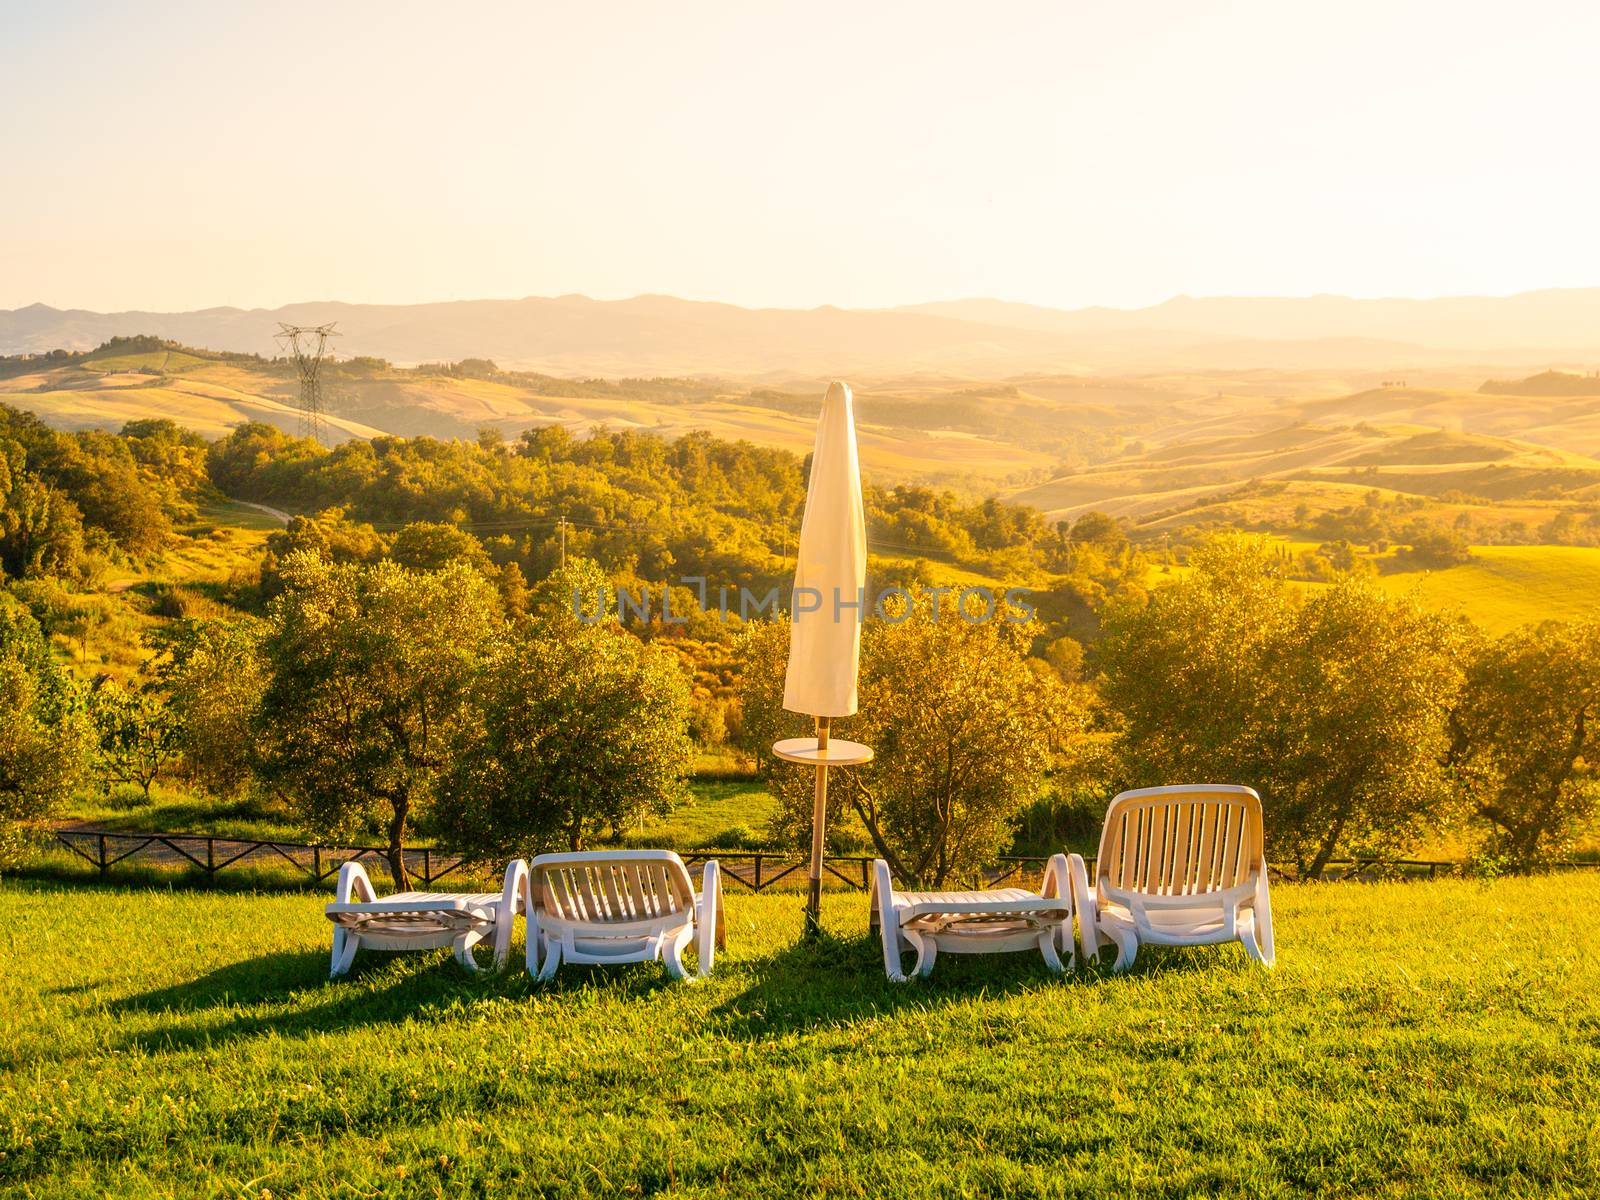 Beautiful rest place with umbrellas and sunbeds in Tuscan landscape. Evening summer sunset. Italy.